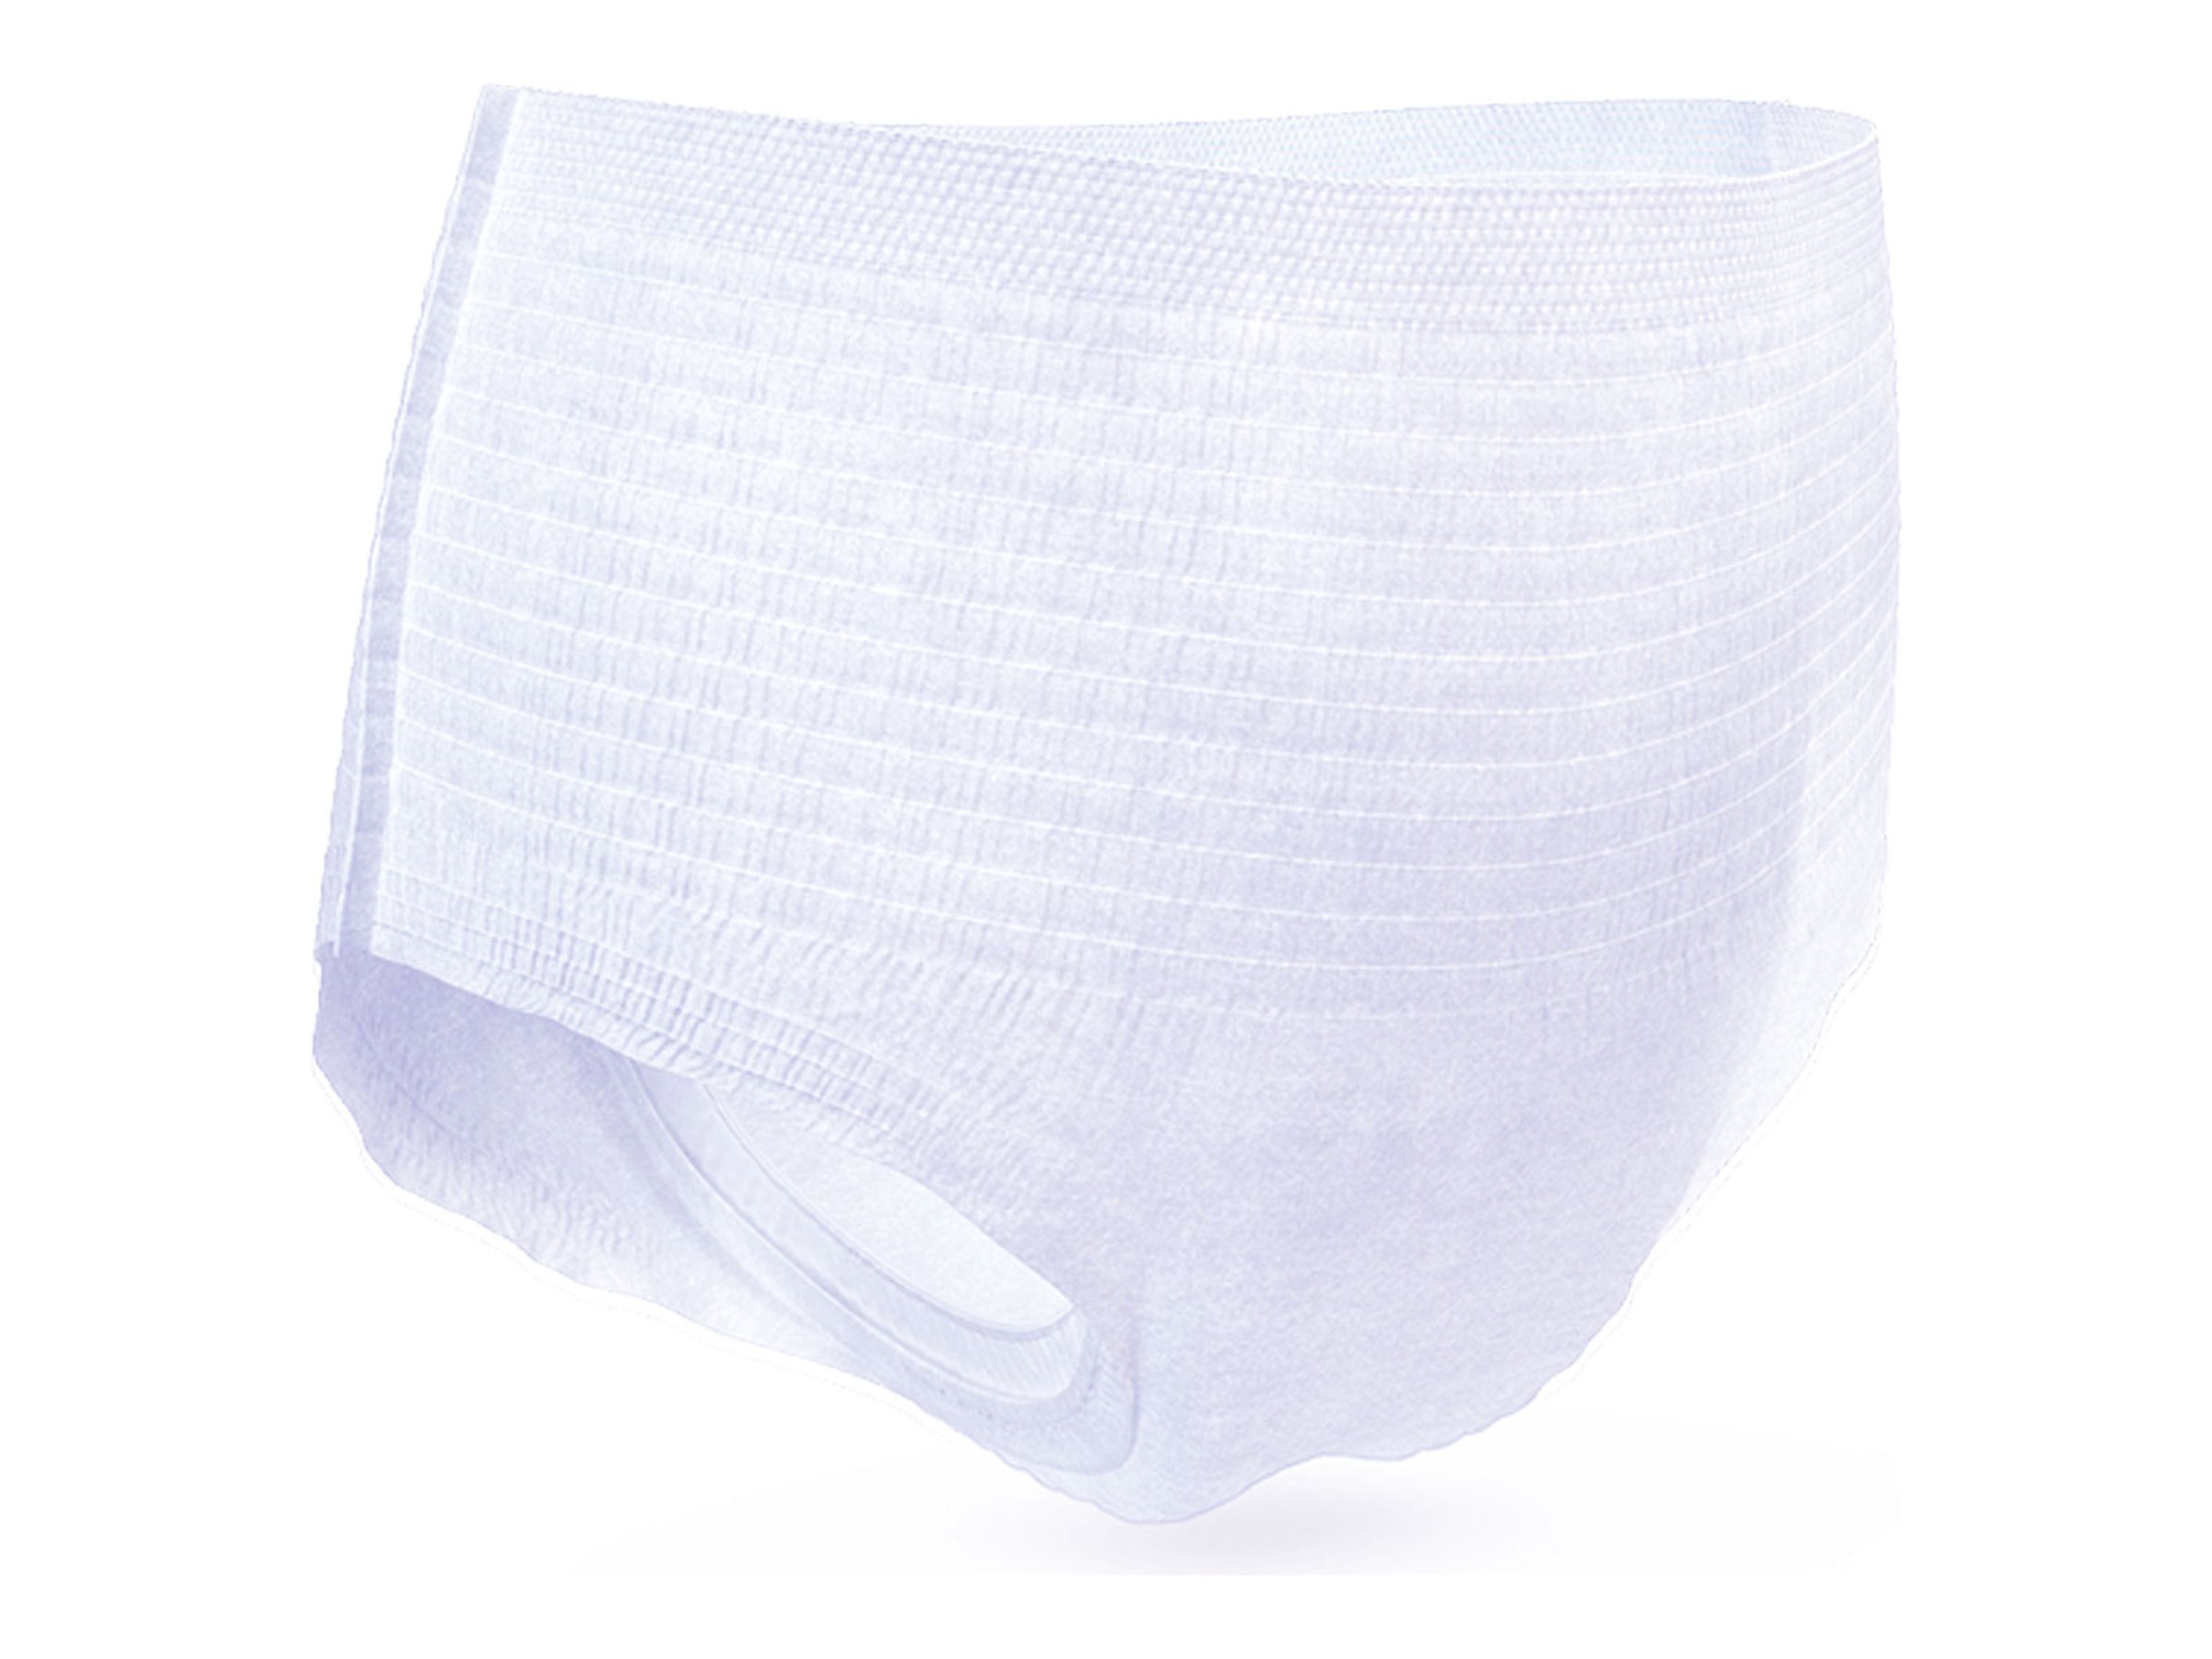 Tena ProSkin SkinComfort Formula Incontinence Diapers - Large - 12's